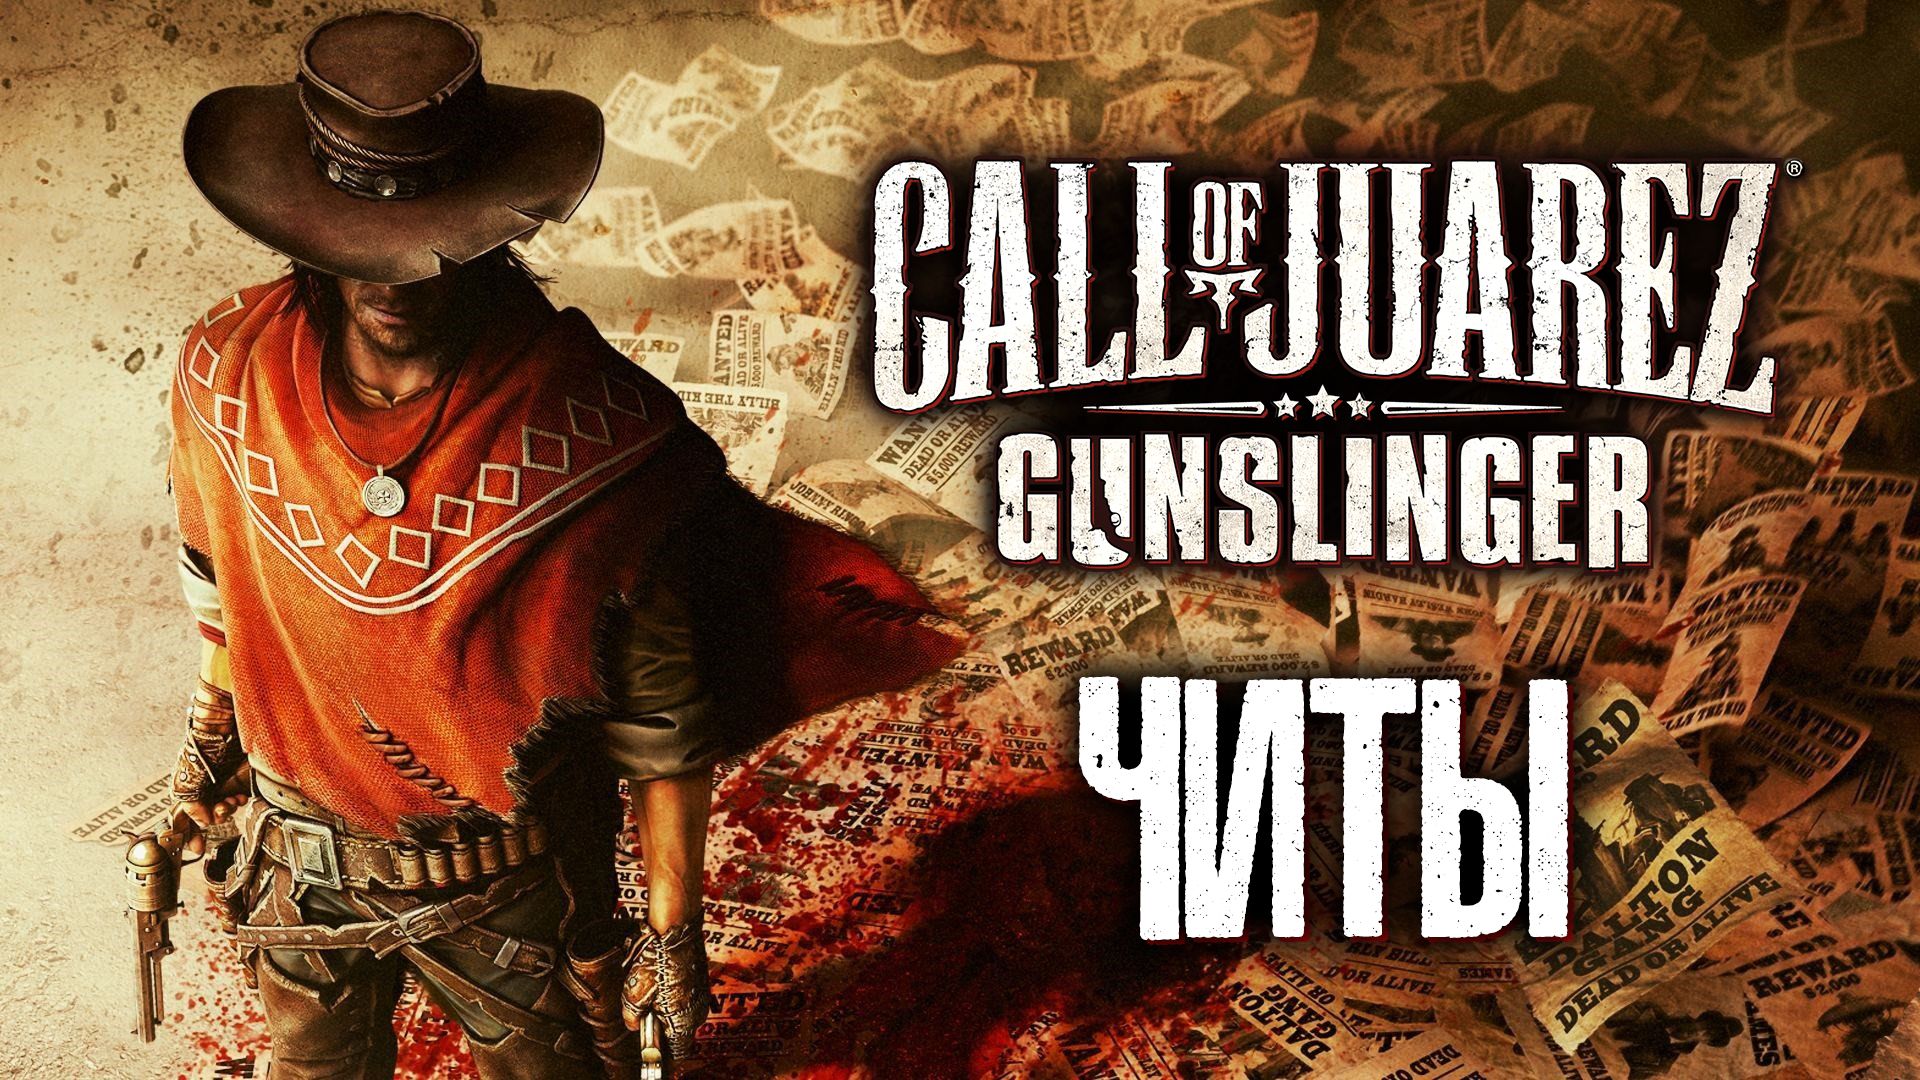 Gunslinger steam is required фото 11